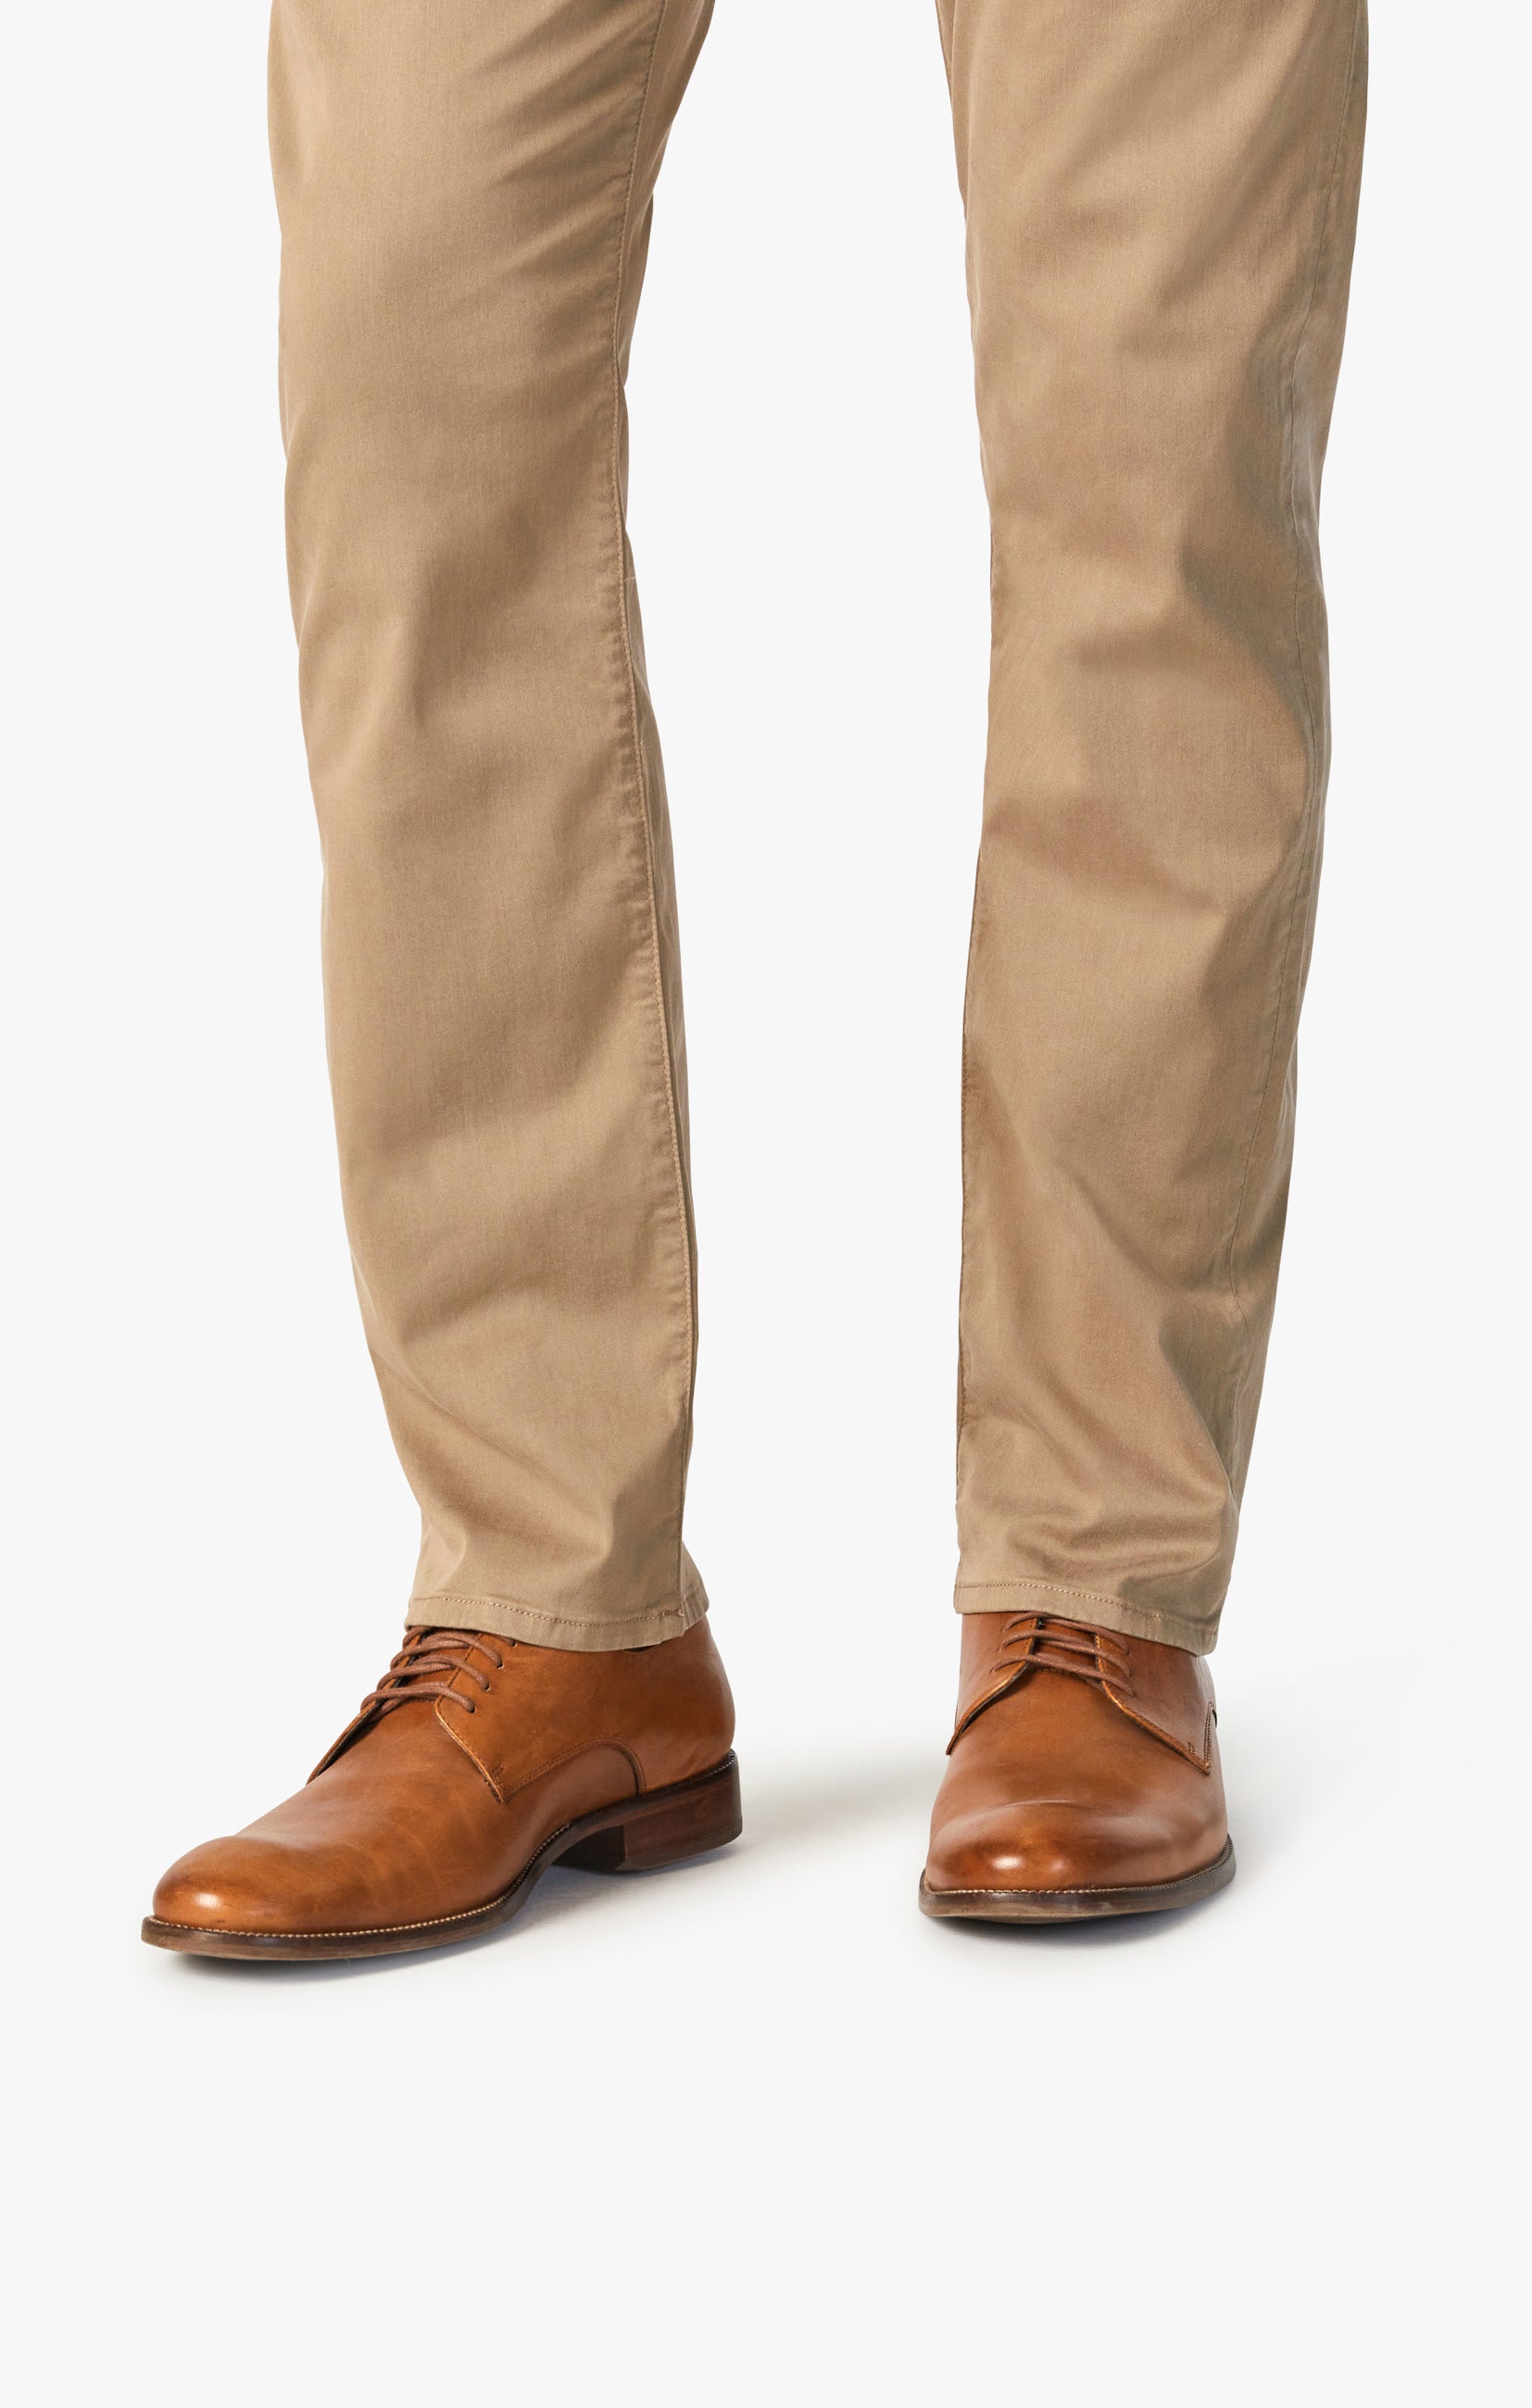 Courage Straight Leg Pants In Roasted Cashew Twill Image 2